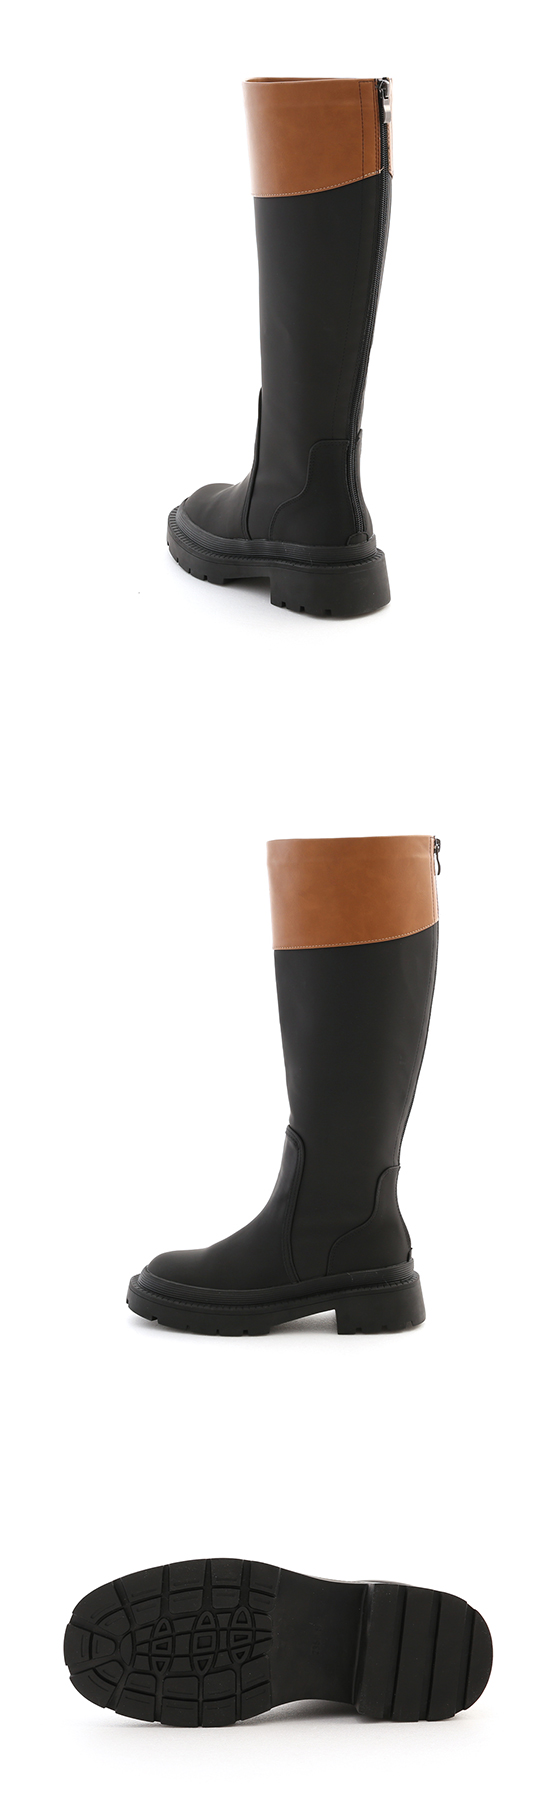 Dual Material Military-Style Under-The-Knee Boots Brown